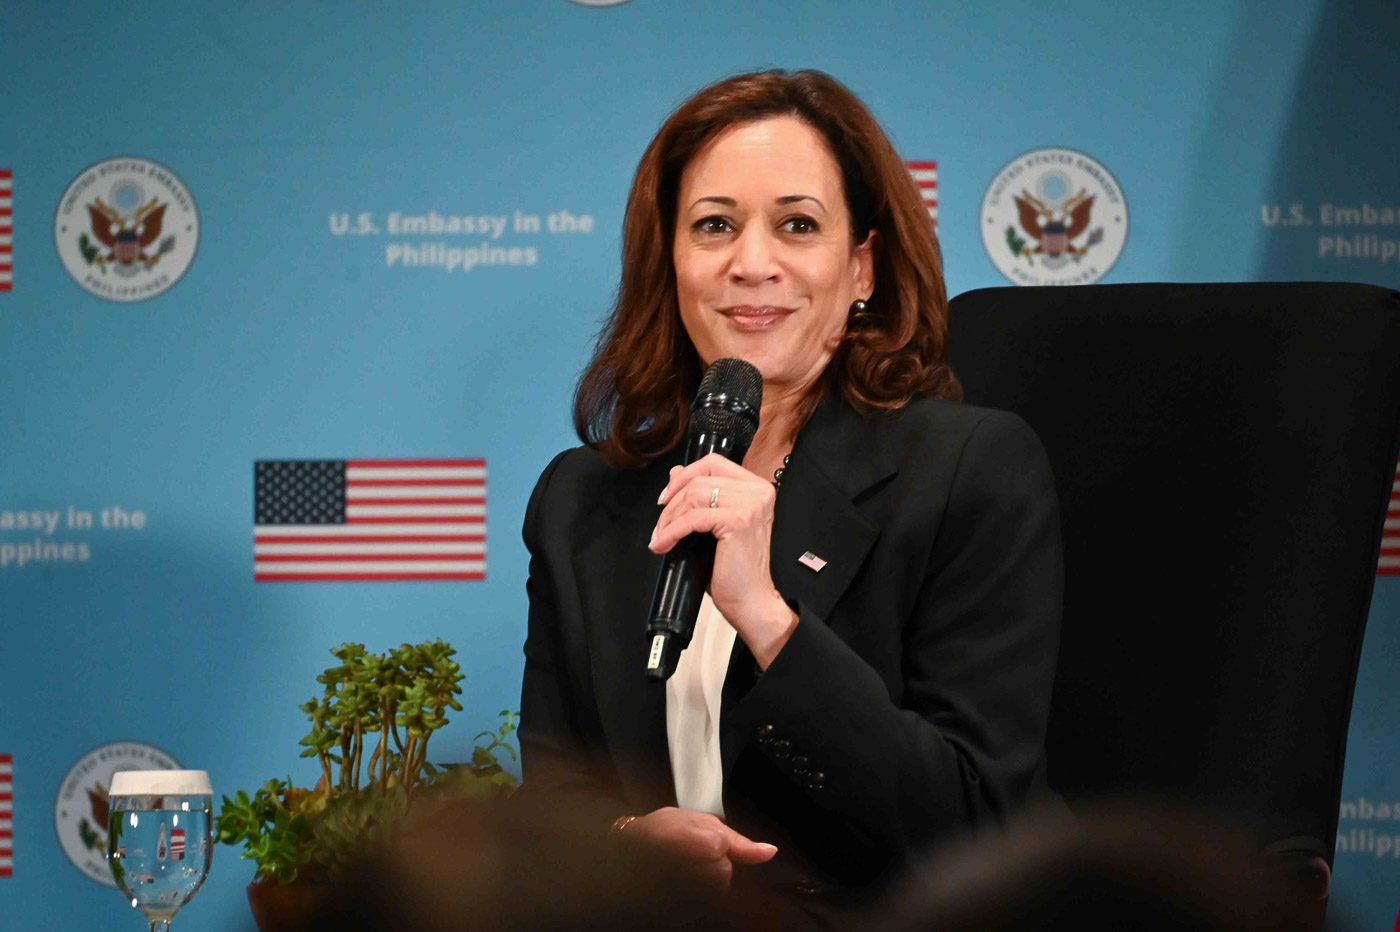 Kamala Harris tells PH rights defenders: ‘You are not alone’